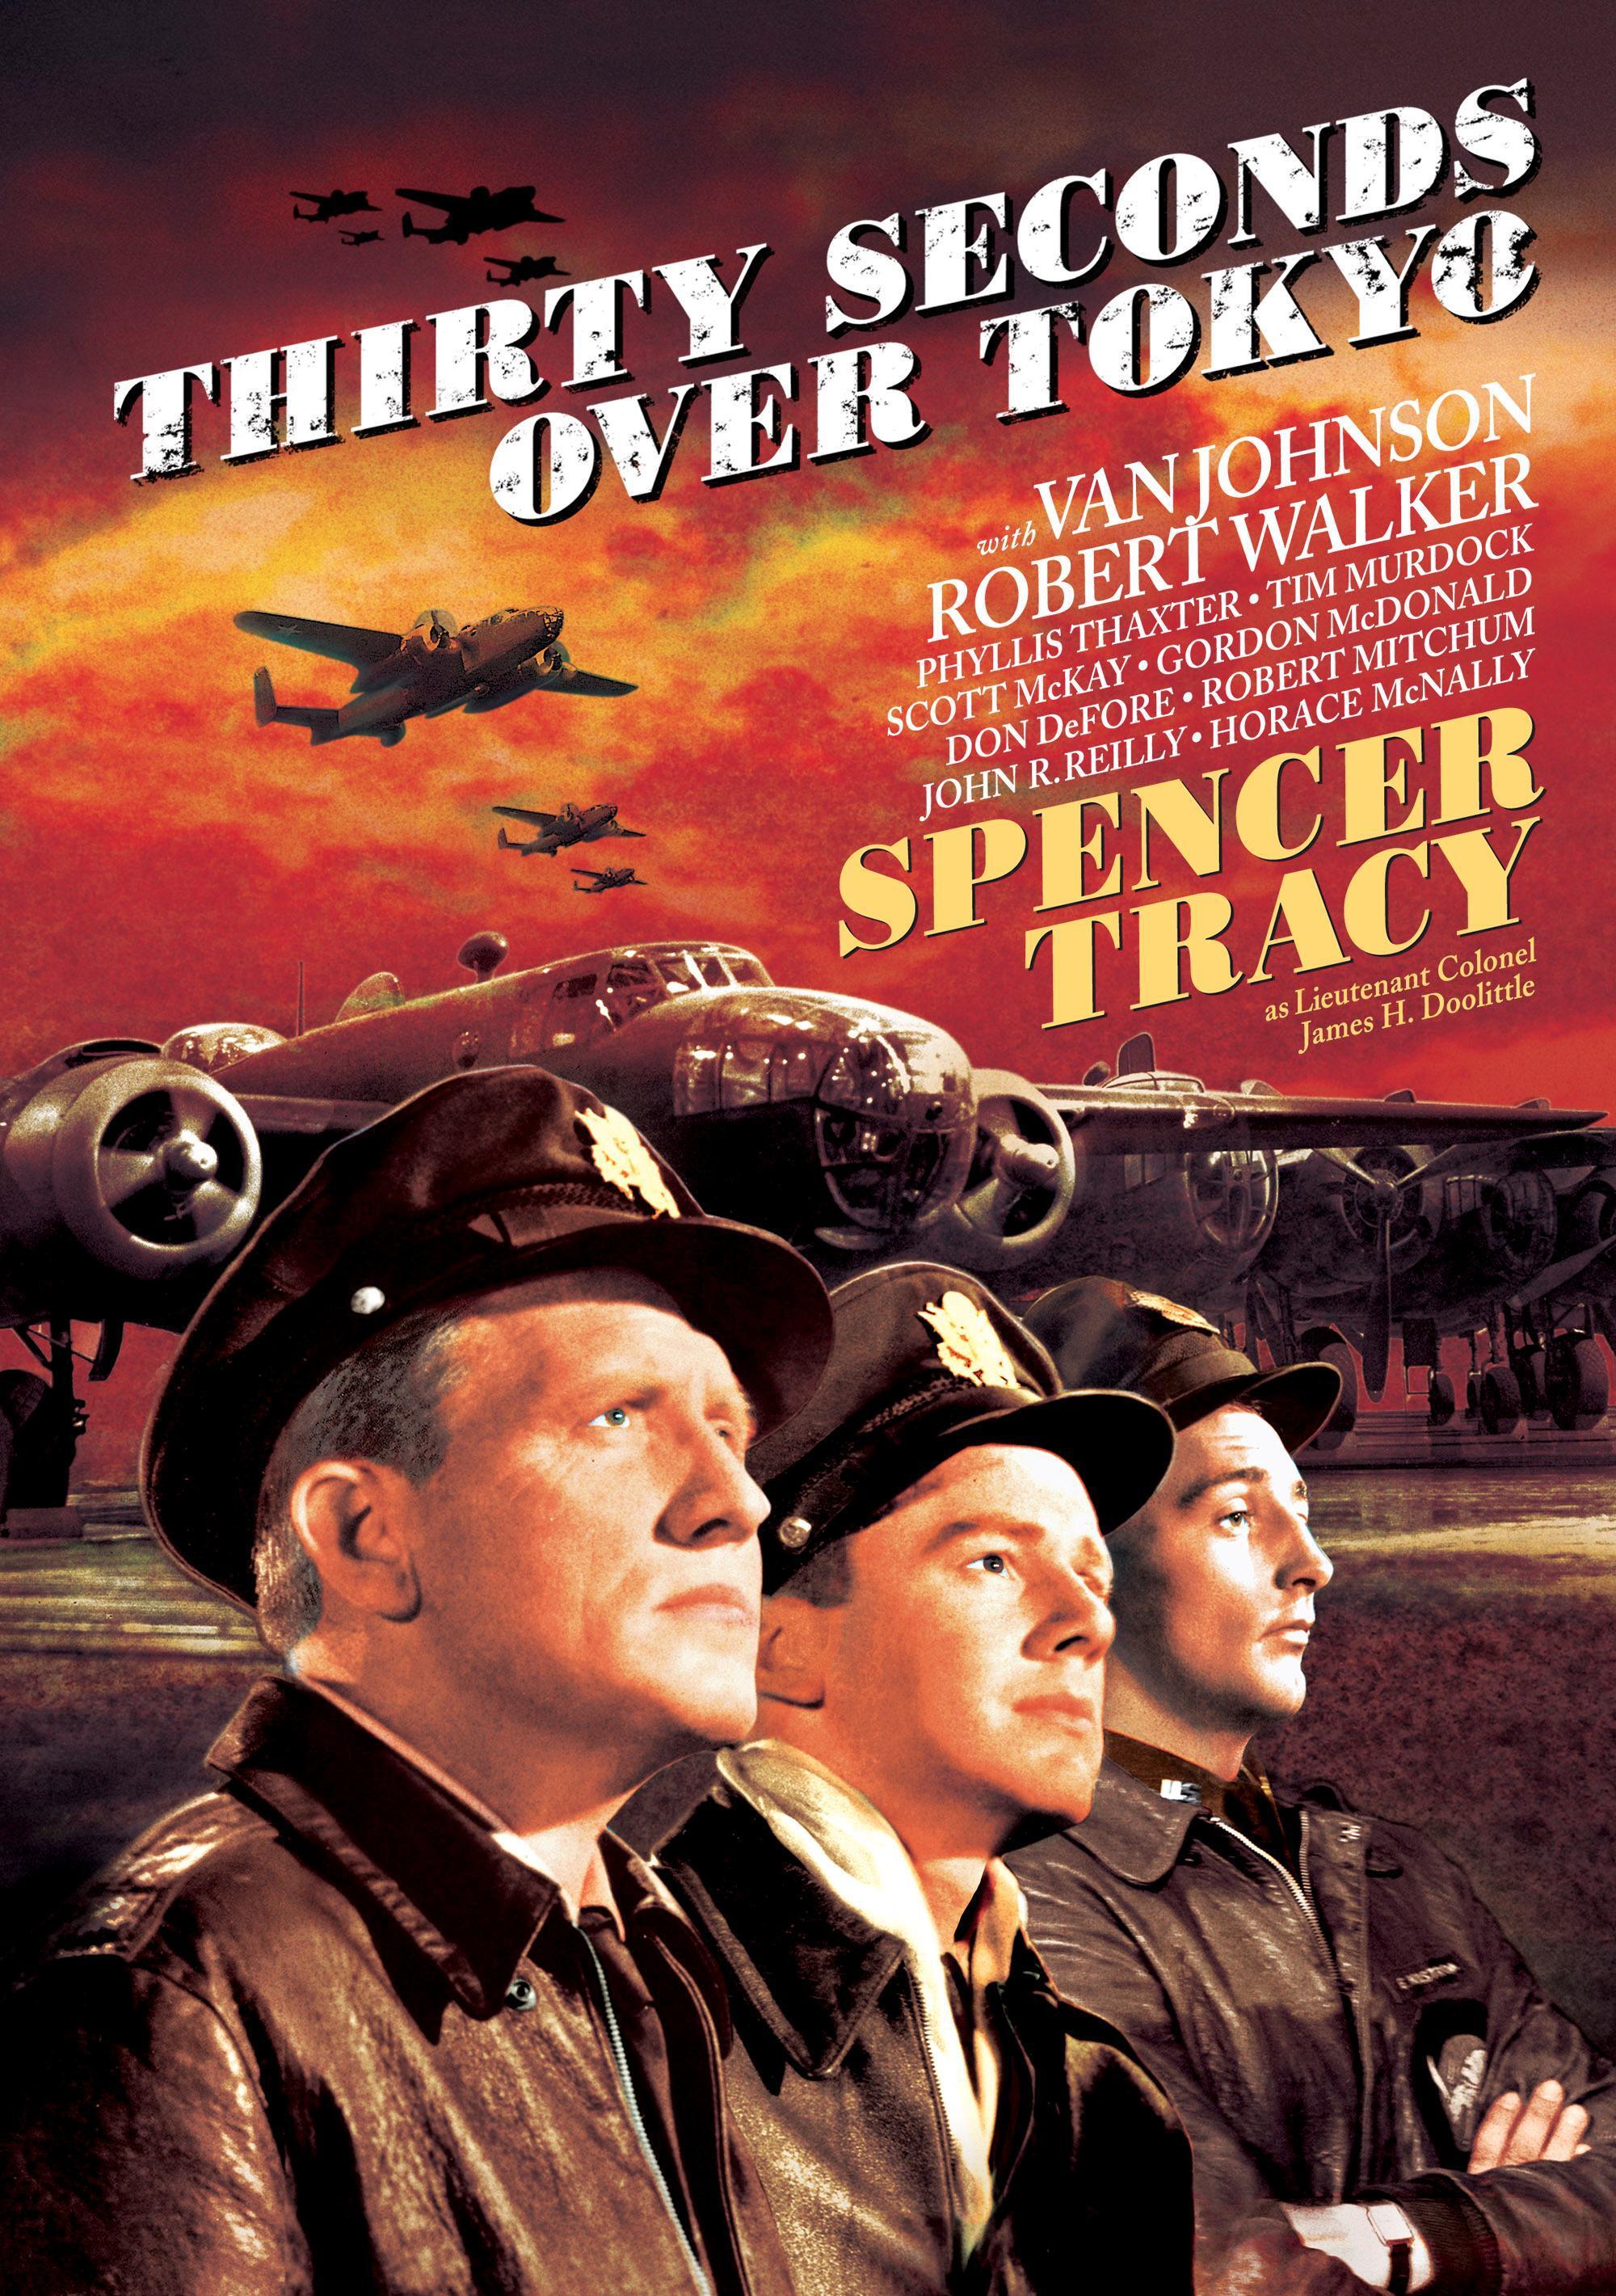 Thirty Seconds Over Tokyo (DVD Full Screen) - DVD [ 1944 ]  - War Movies On DVD - Movies On GRUV